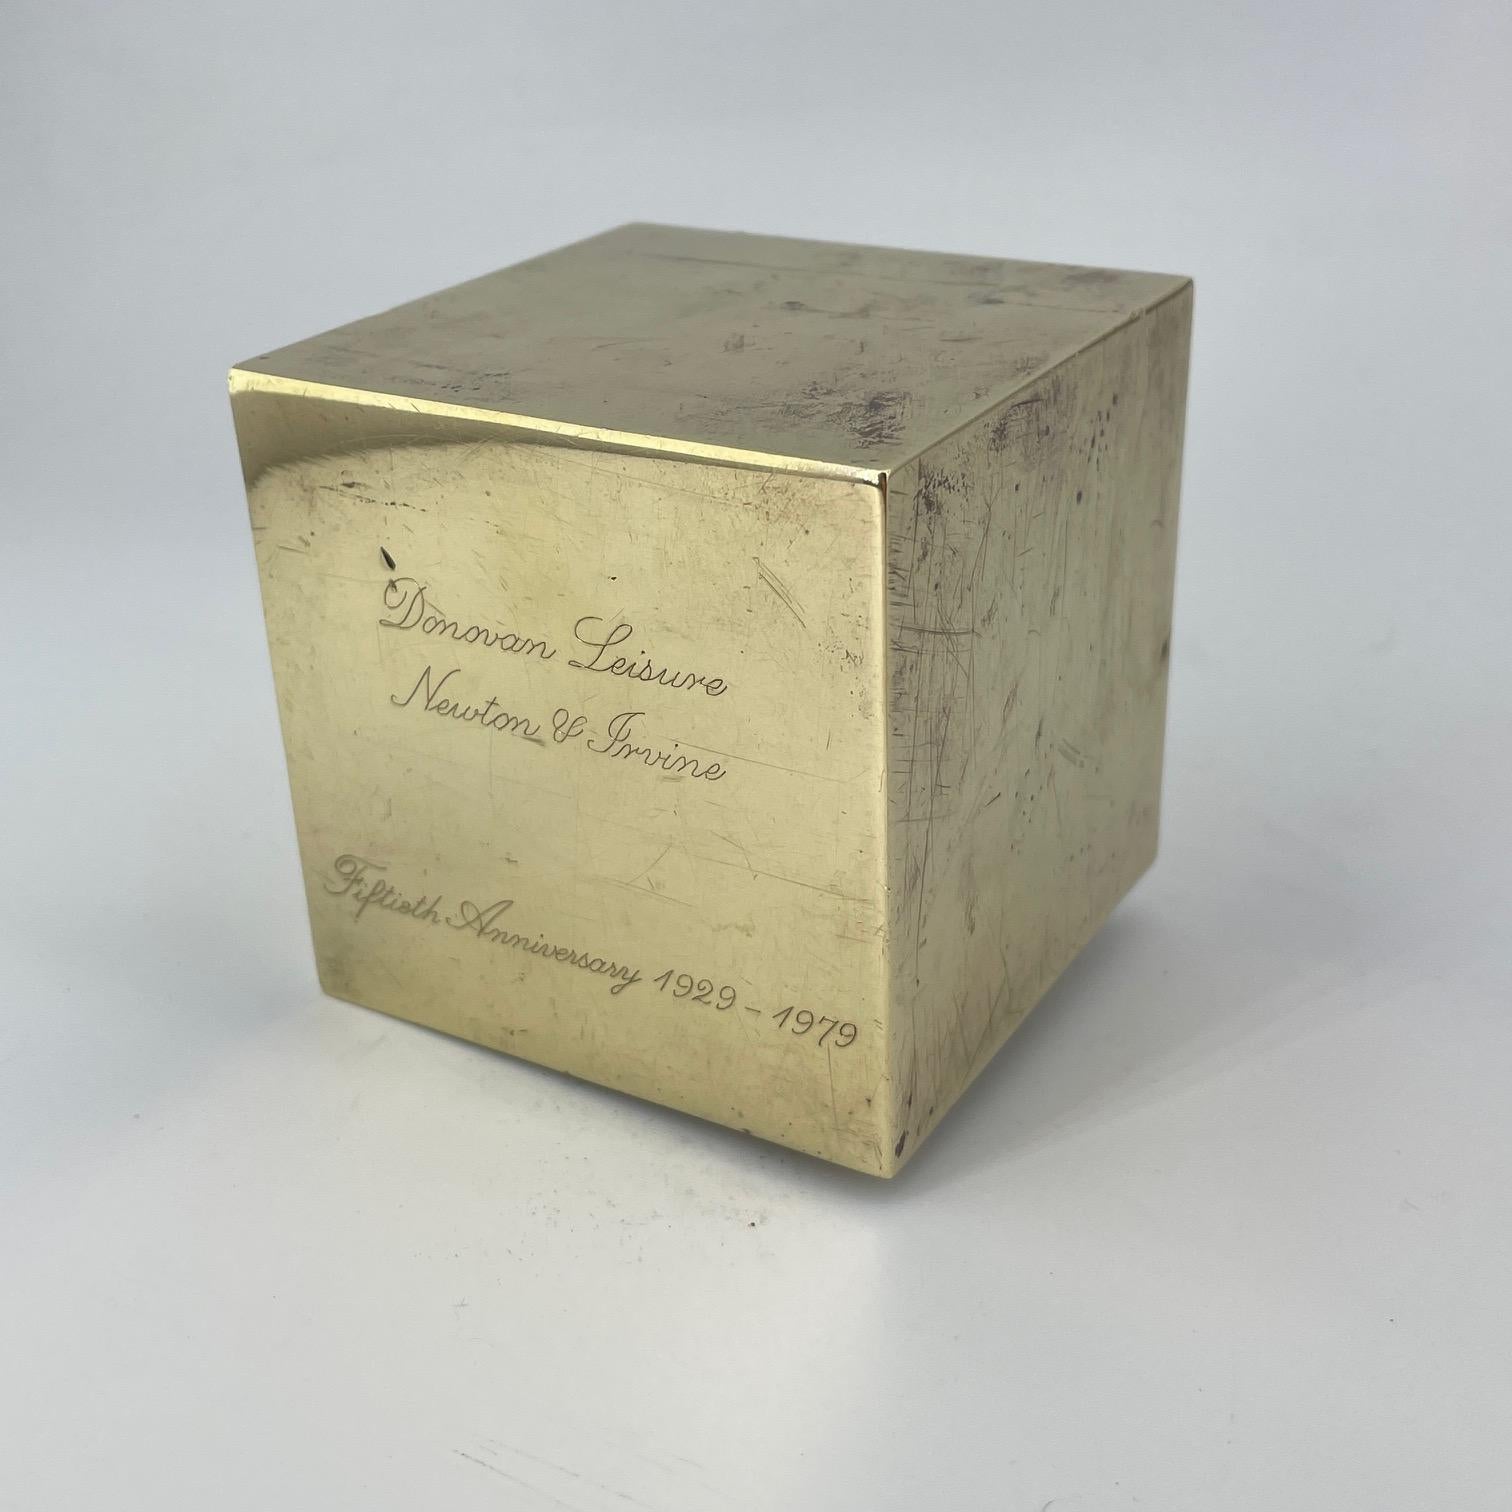 Extremely rare New York City historical relic. A fiftieth anniversary brass cubic monolith commemorative desk sculpture. Issued to monogram; AWS. Approx. 45-60 members of firm a that time, only a handful were issued this paperweight in solid Brass